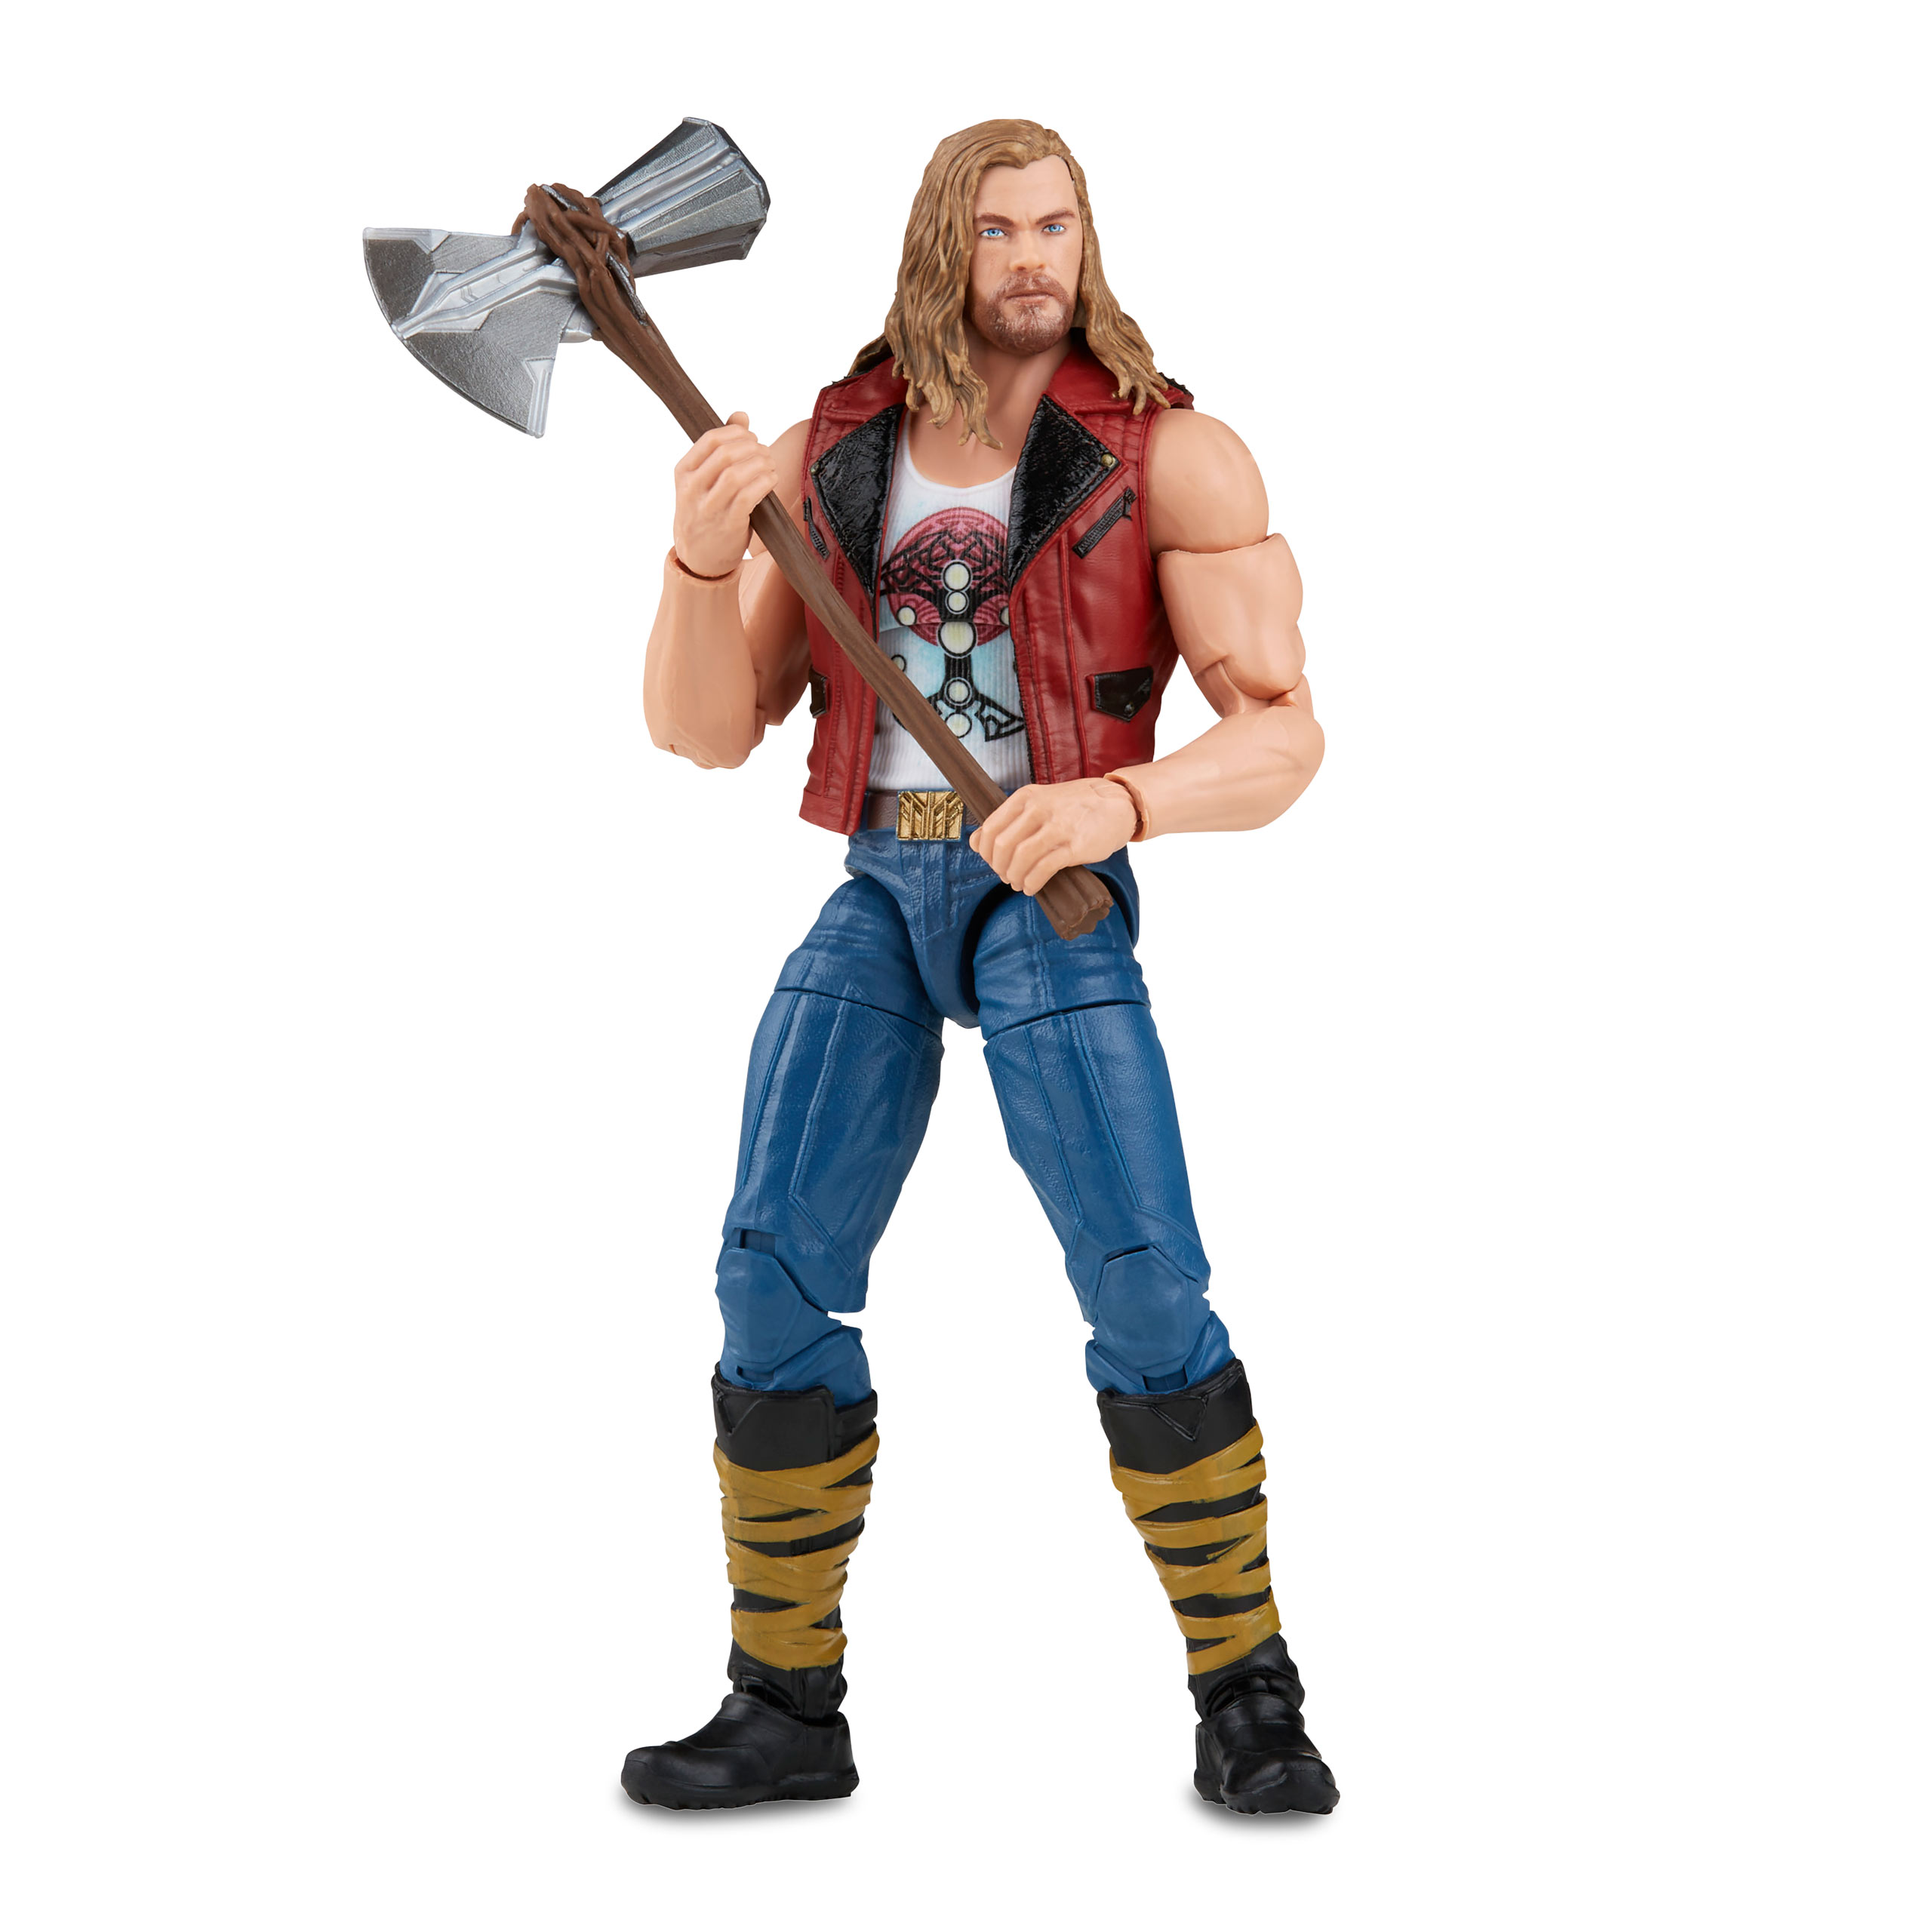 Thor: Love and Thunder - Ravager Thor Actionfigur